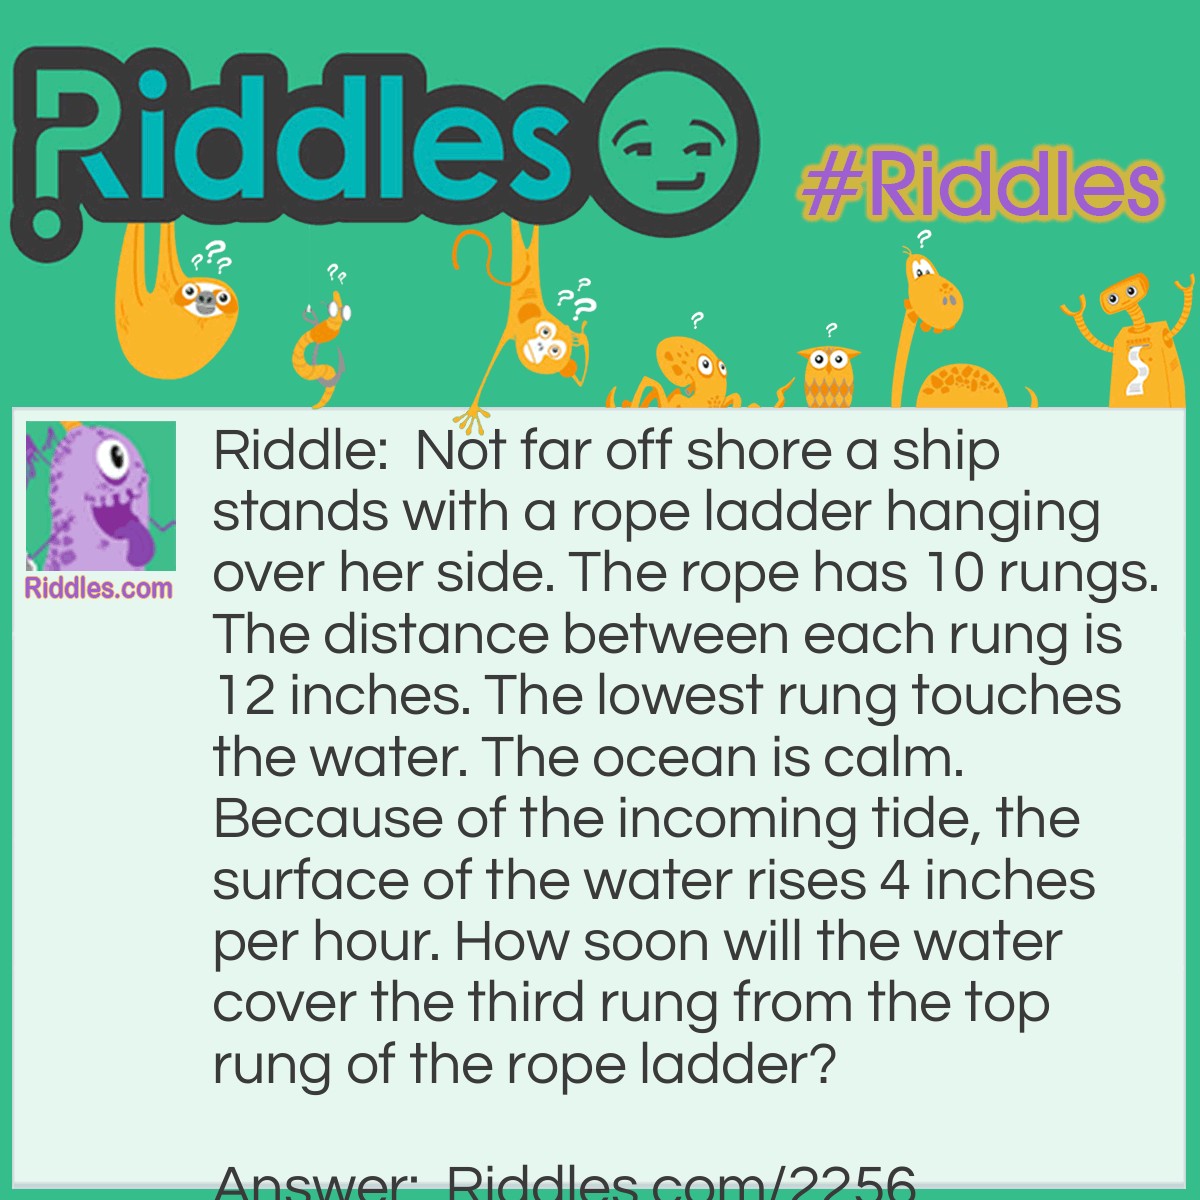 Riddle: Not far off shore a ship stands with a rope ladder hanging over her side. The rope has 10 rungs. The distance between each rung is 12 inches. The lowest rung touches the water. The ocean is calm. Because of the incoming tide, the surface of the water rises 4 inches per hour. How soon will the water cover the third rung from the top rung of the rope ladder? Answer: When a problem deals with a physical phenonmenon, the phenonmenon should be considered as well as the numbers given. As the water rises, so does the rope ladder. The water will never cover the rung.